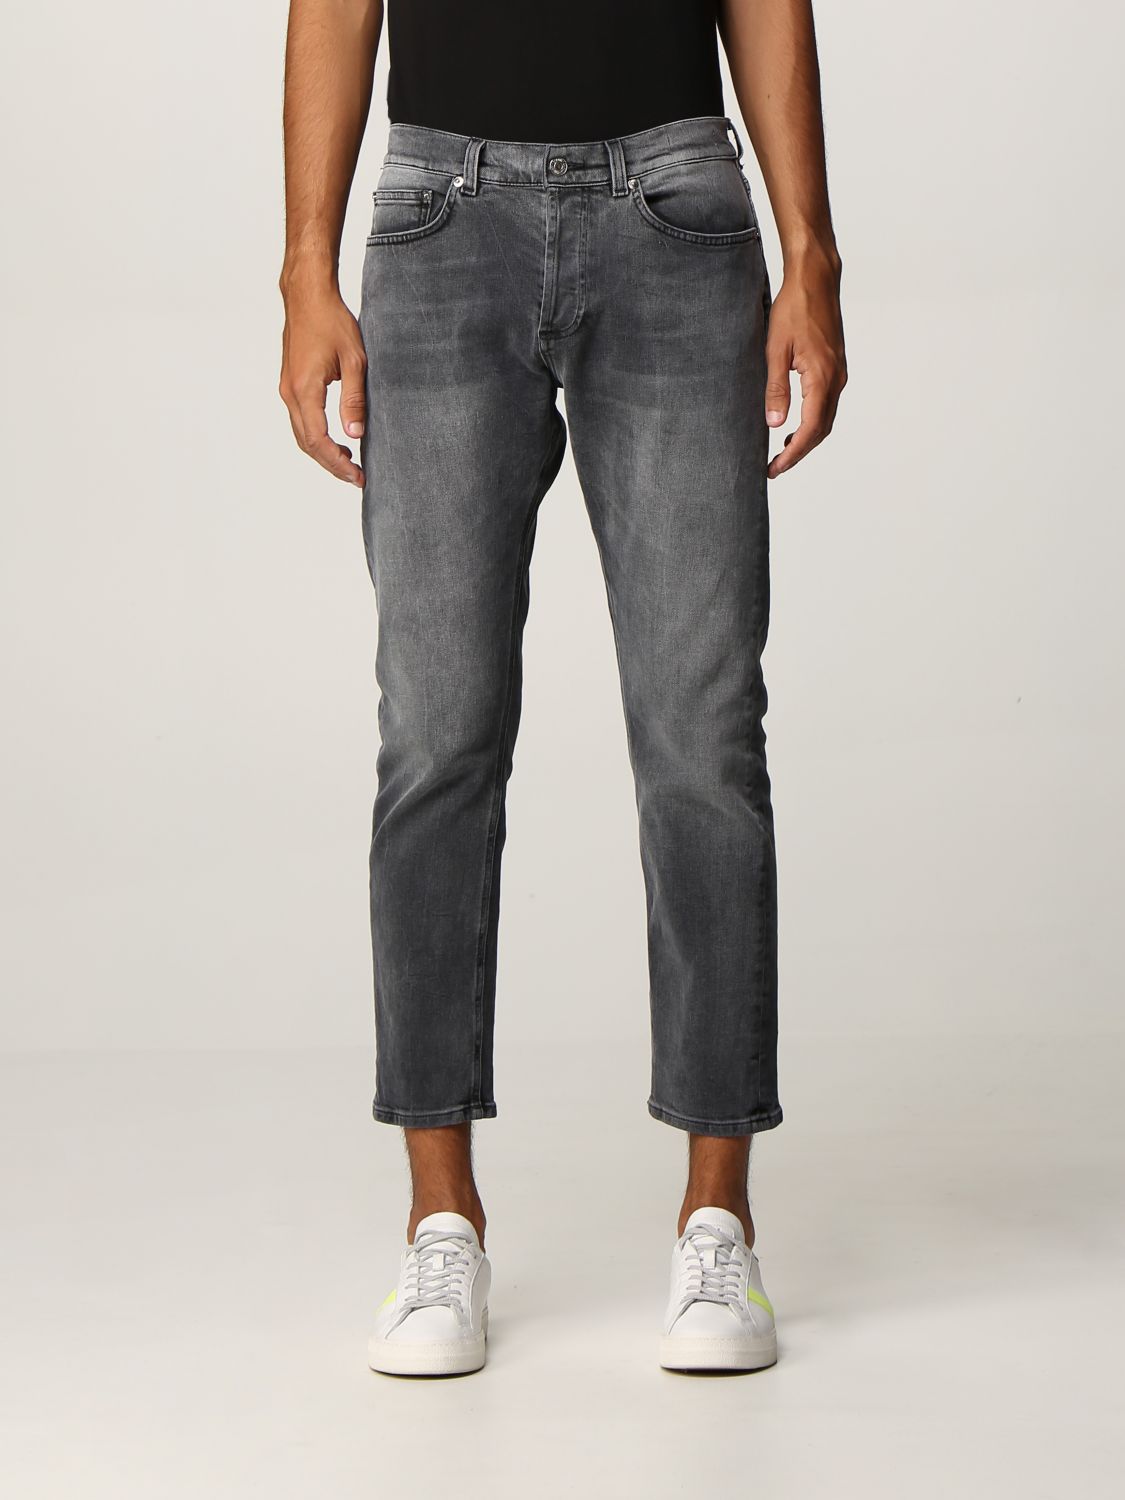 GRIFONI: Jeans men - Grey | Jeans Grifoni GL142003/94 GIGLIO.COM